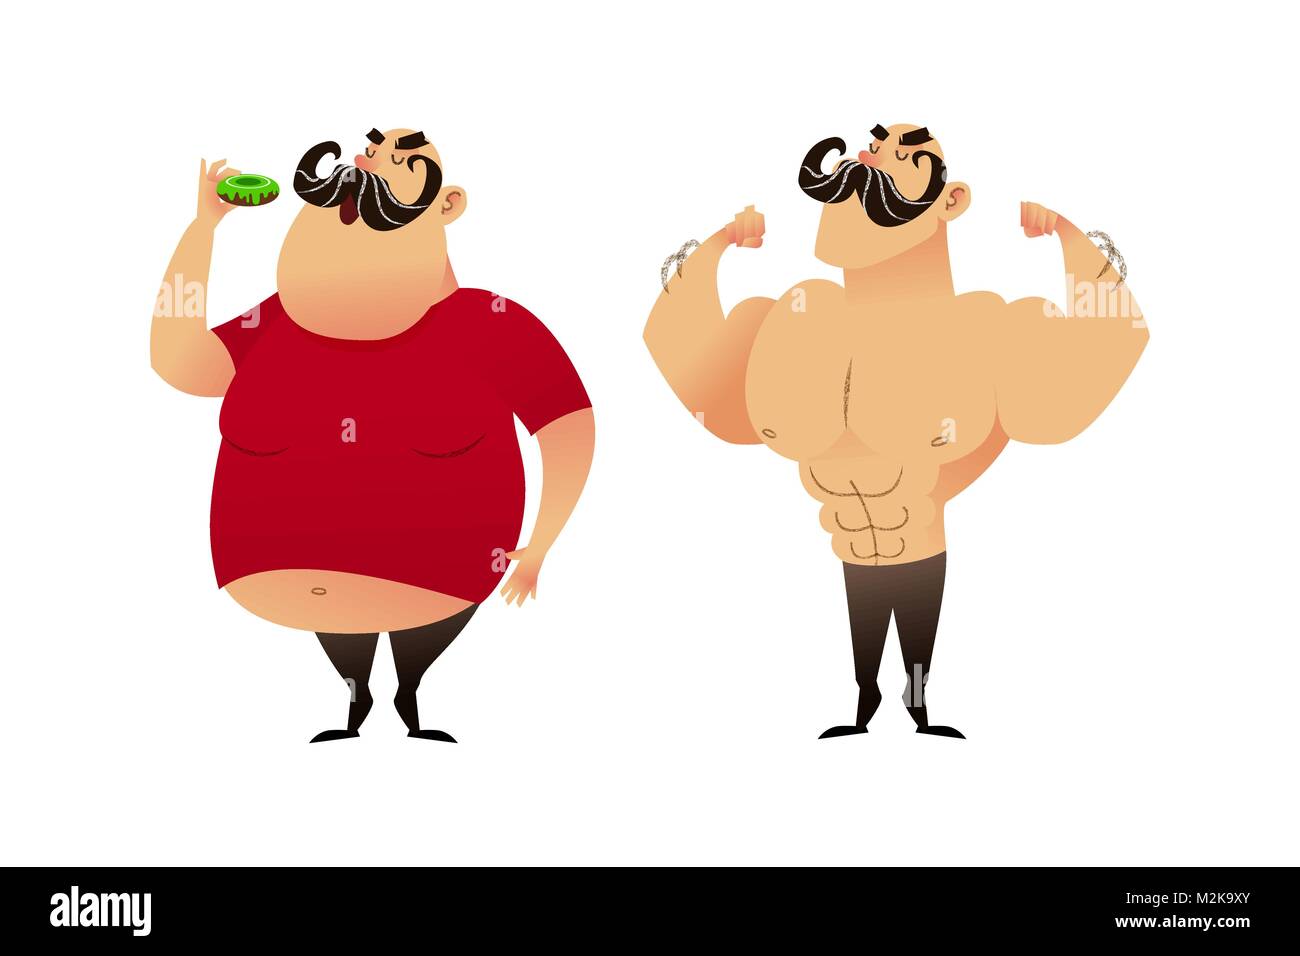 A fat guy and an athlete. Before and after. Doing sports and eating healthy concepts. A man with obesity is eating a donut. The strongman and the wrestler show their muscles. Successful weight loss and great shape. Stock Vector